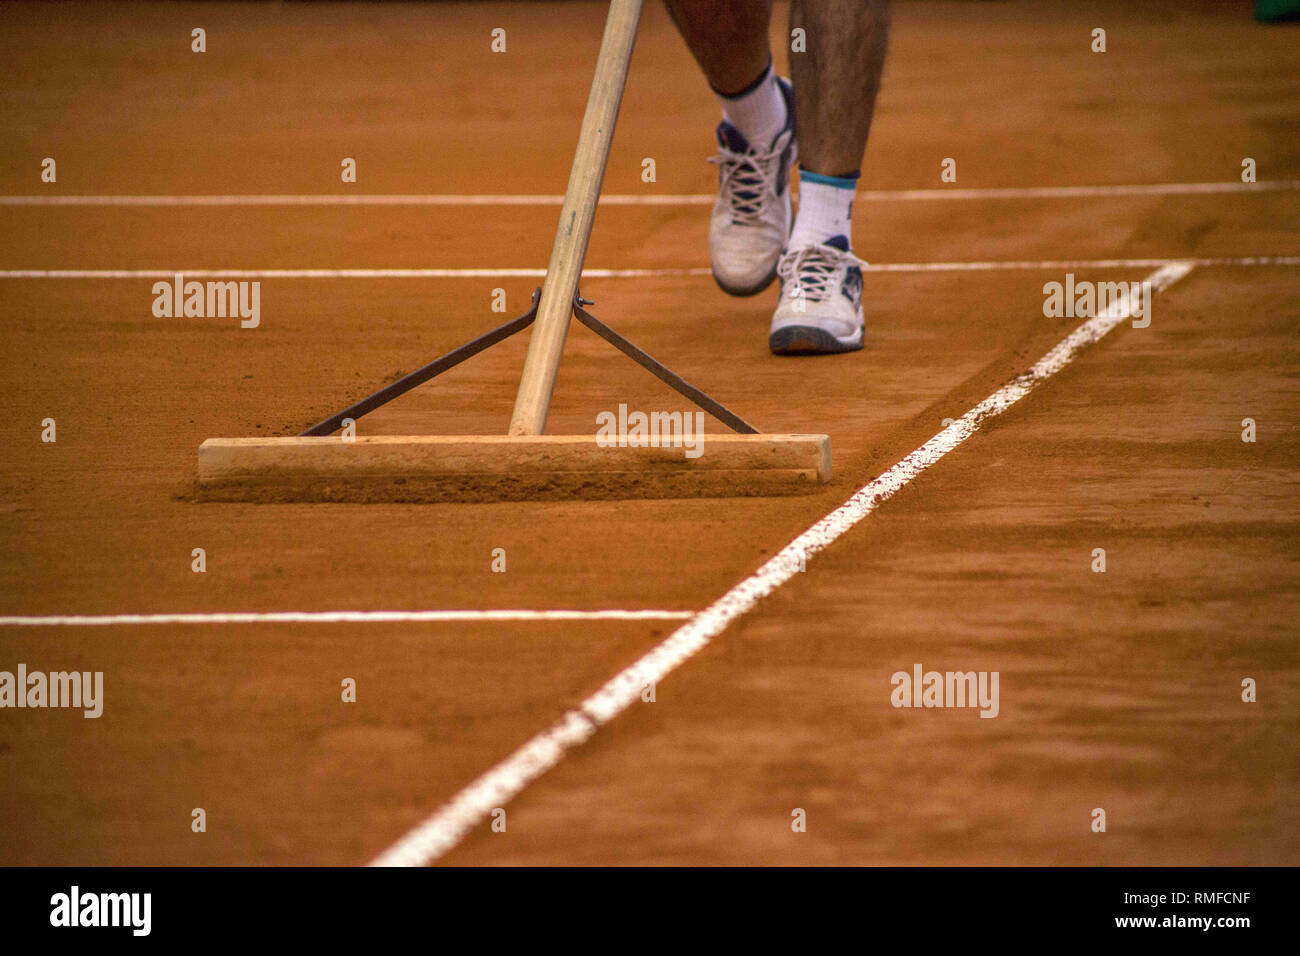 Buenos Aires, Federal Capital, Argentina. 14th Feb, 2019. Preparations for the start of the match in the Main Court Guillermos Vilas of the Buenos Aires Lawn Tennis Club in the ATP 250 of the Argentina Open 2019. Credit: Roberto Almeida Aveledo/ZUMA Wire/Alamy Live News Stock Photo